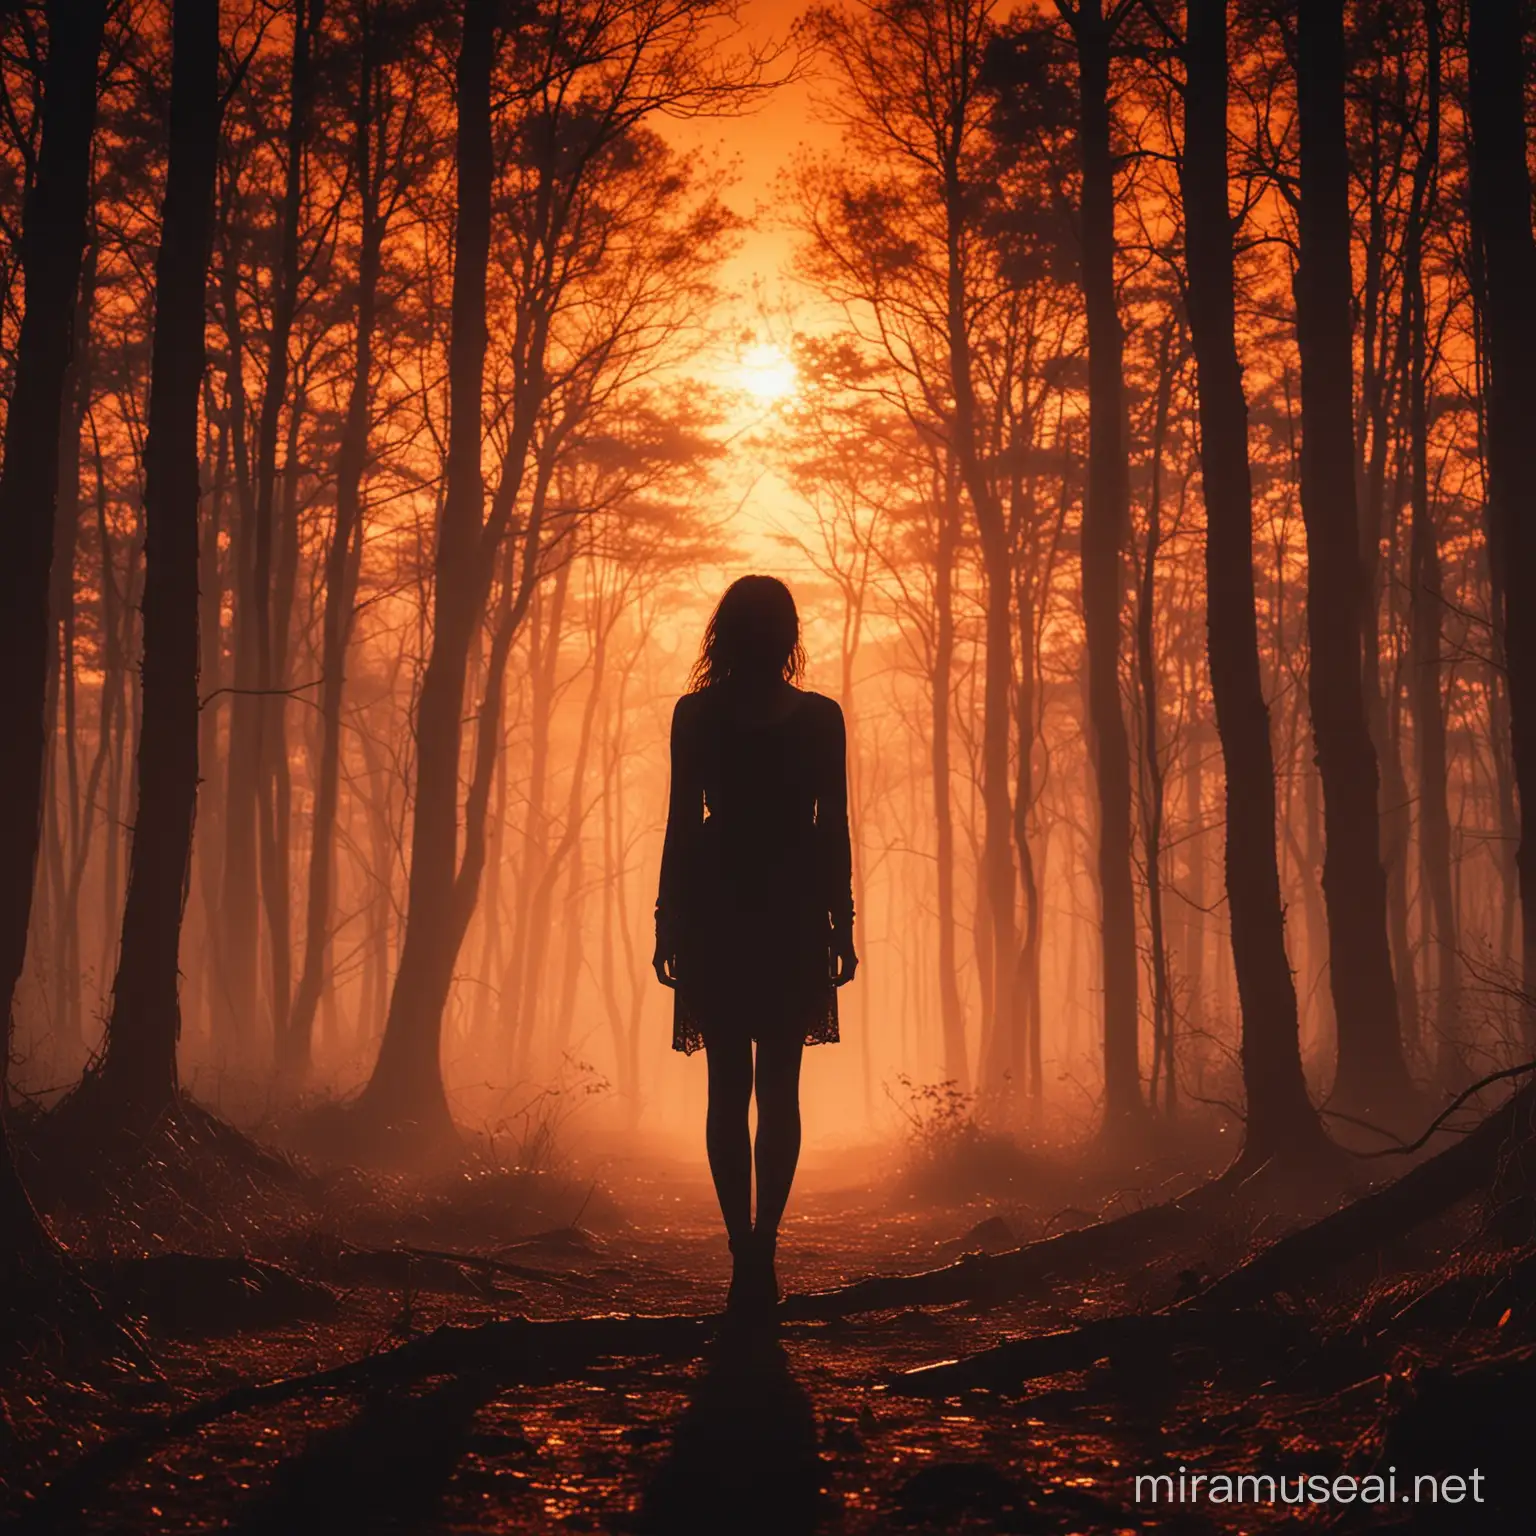 Mysterious Woman Silhouette in Enchanting Sunset Forest